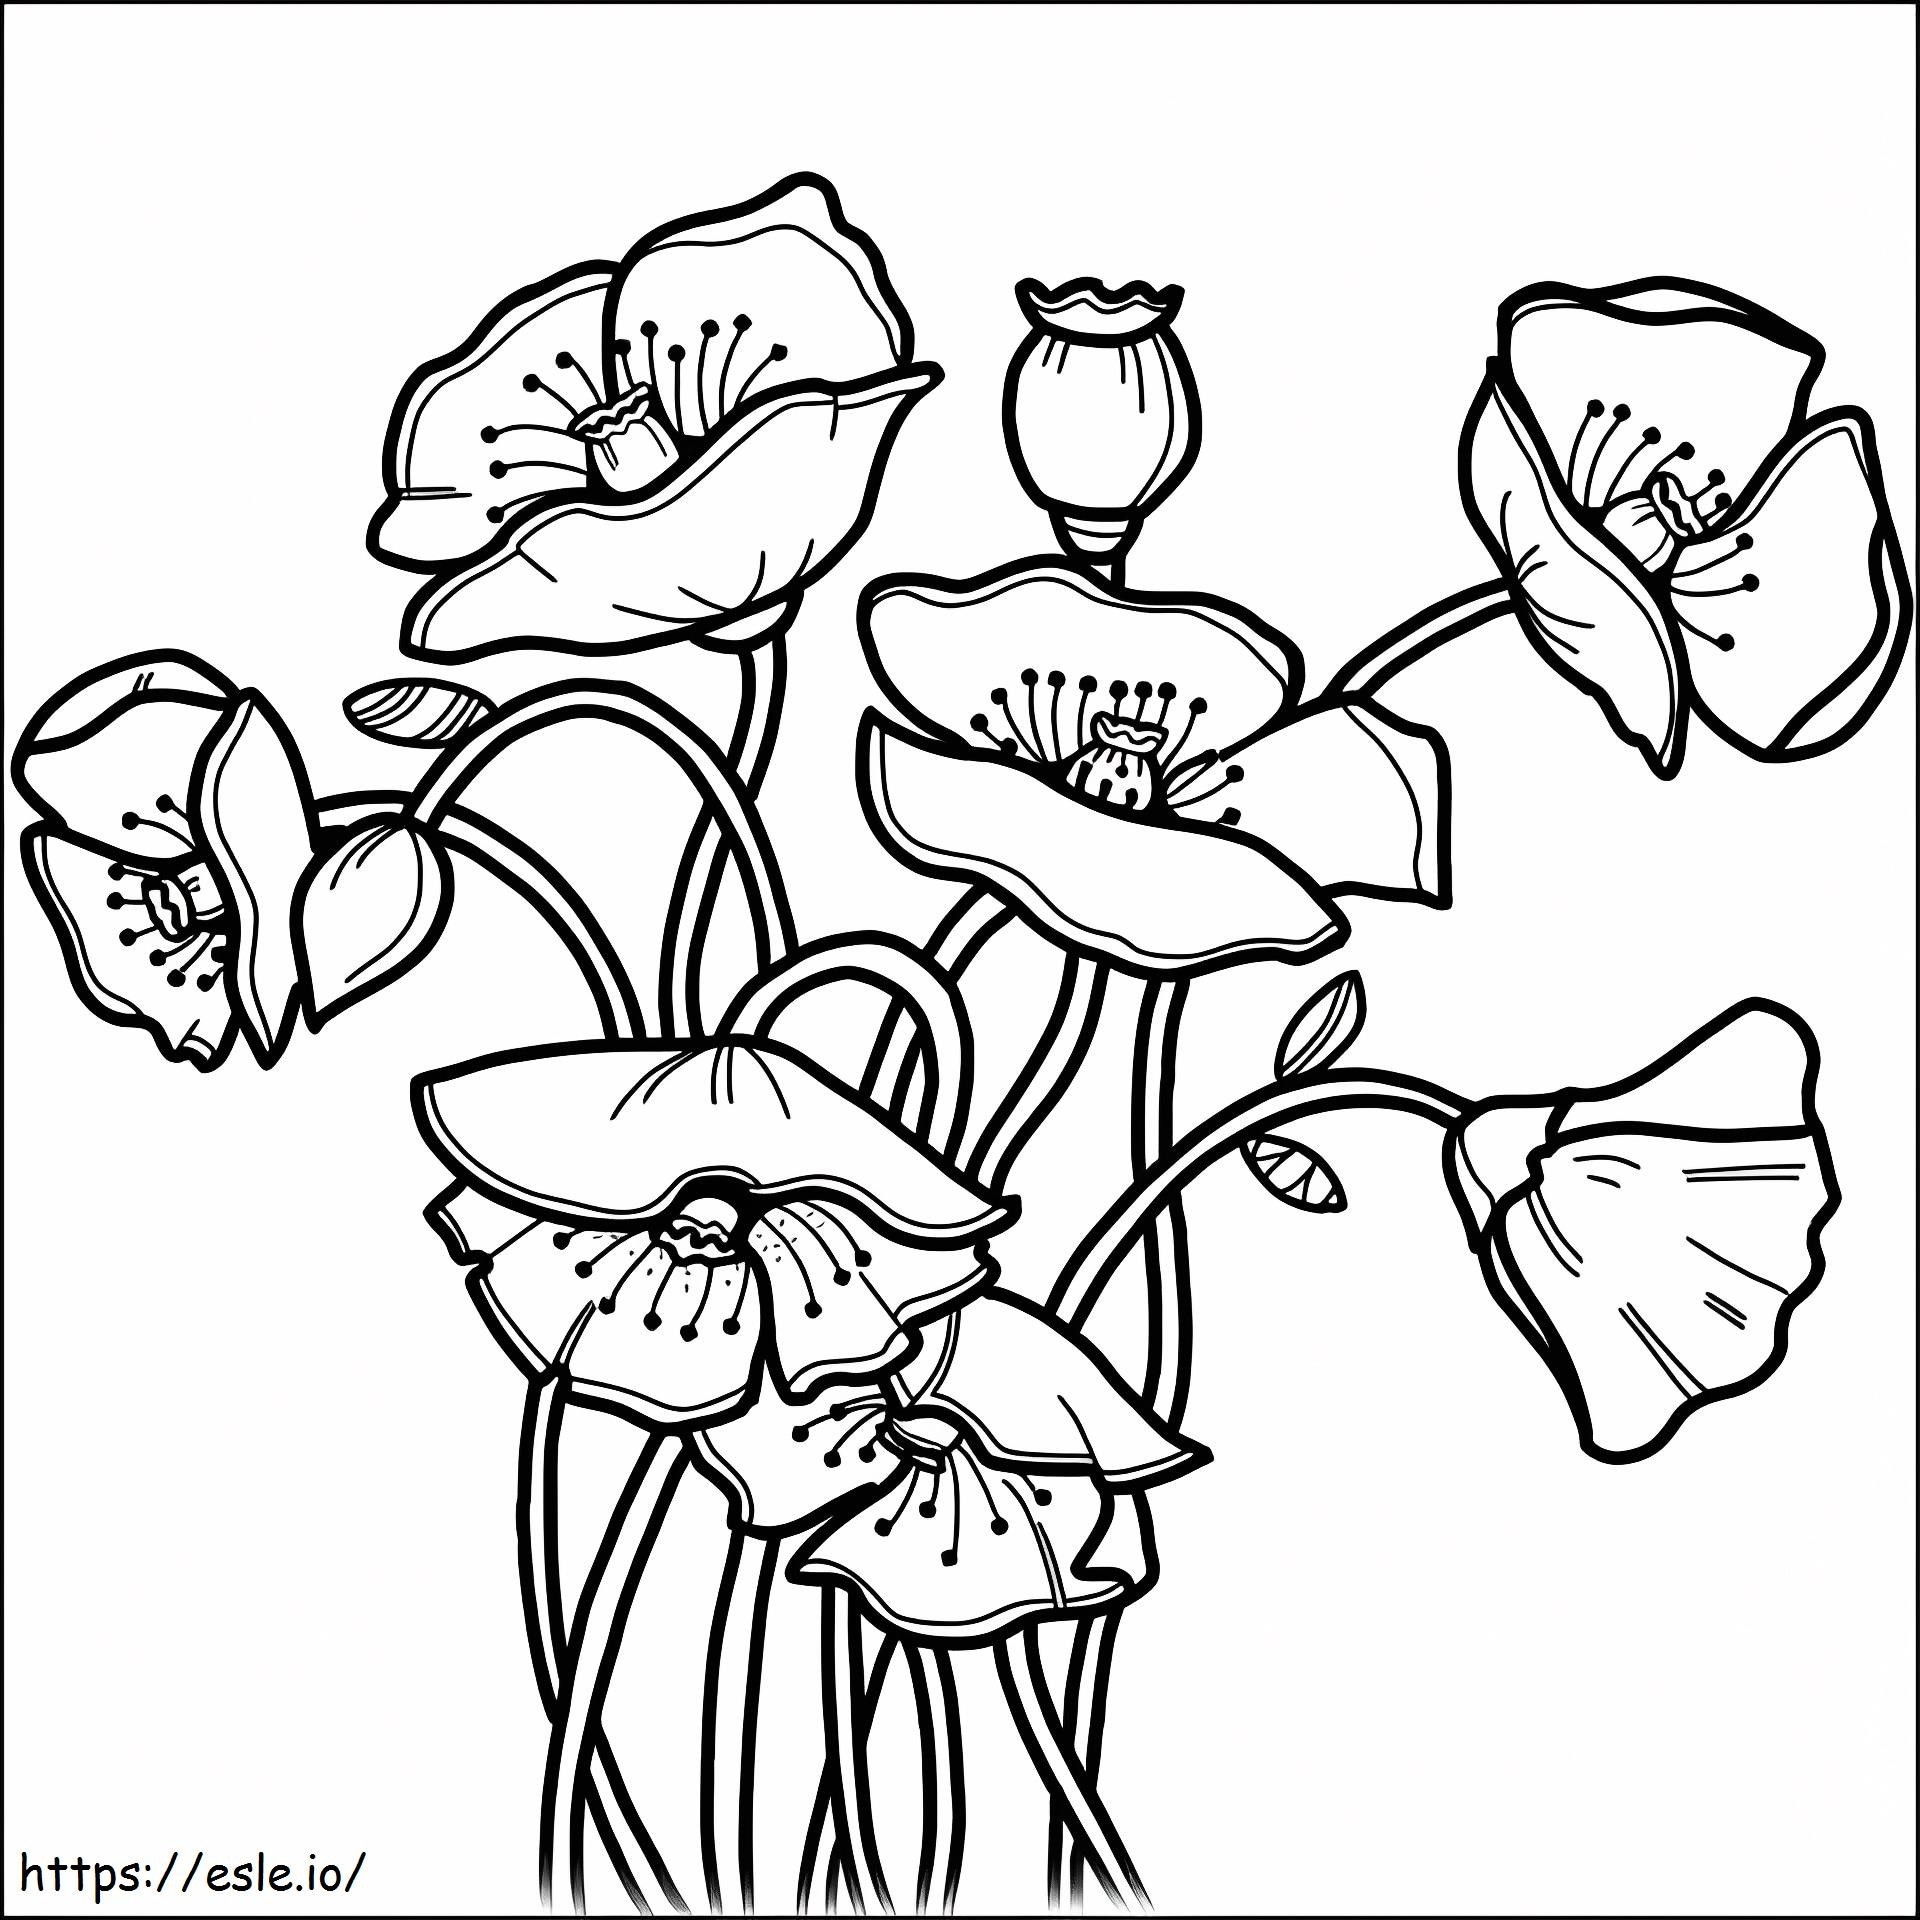 Poppy 1 coloring page